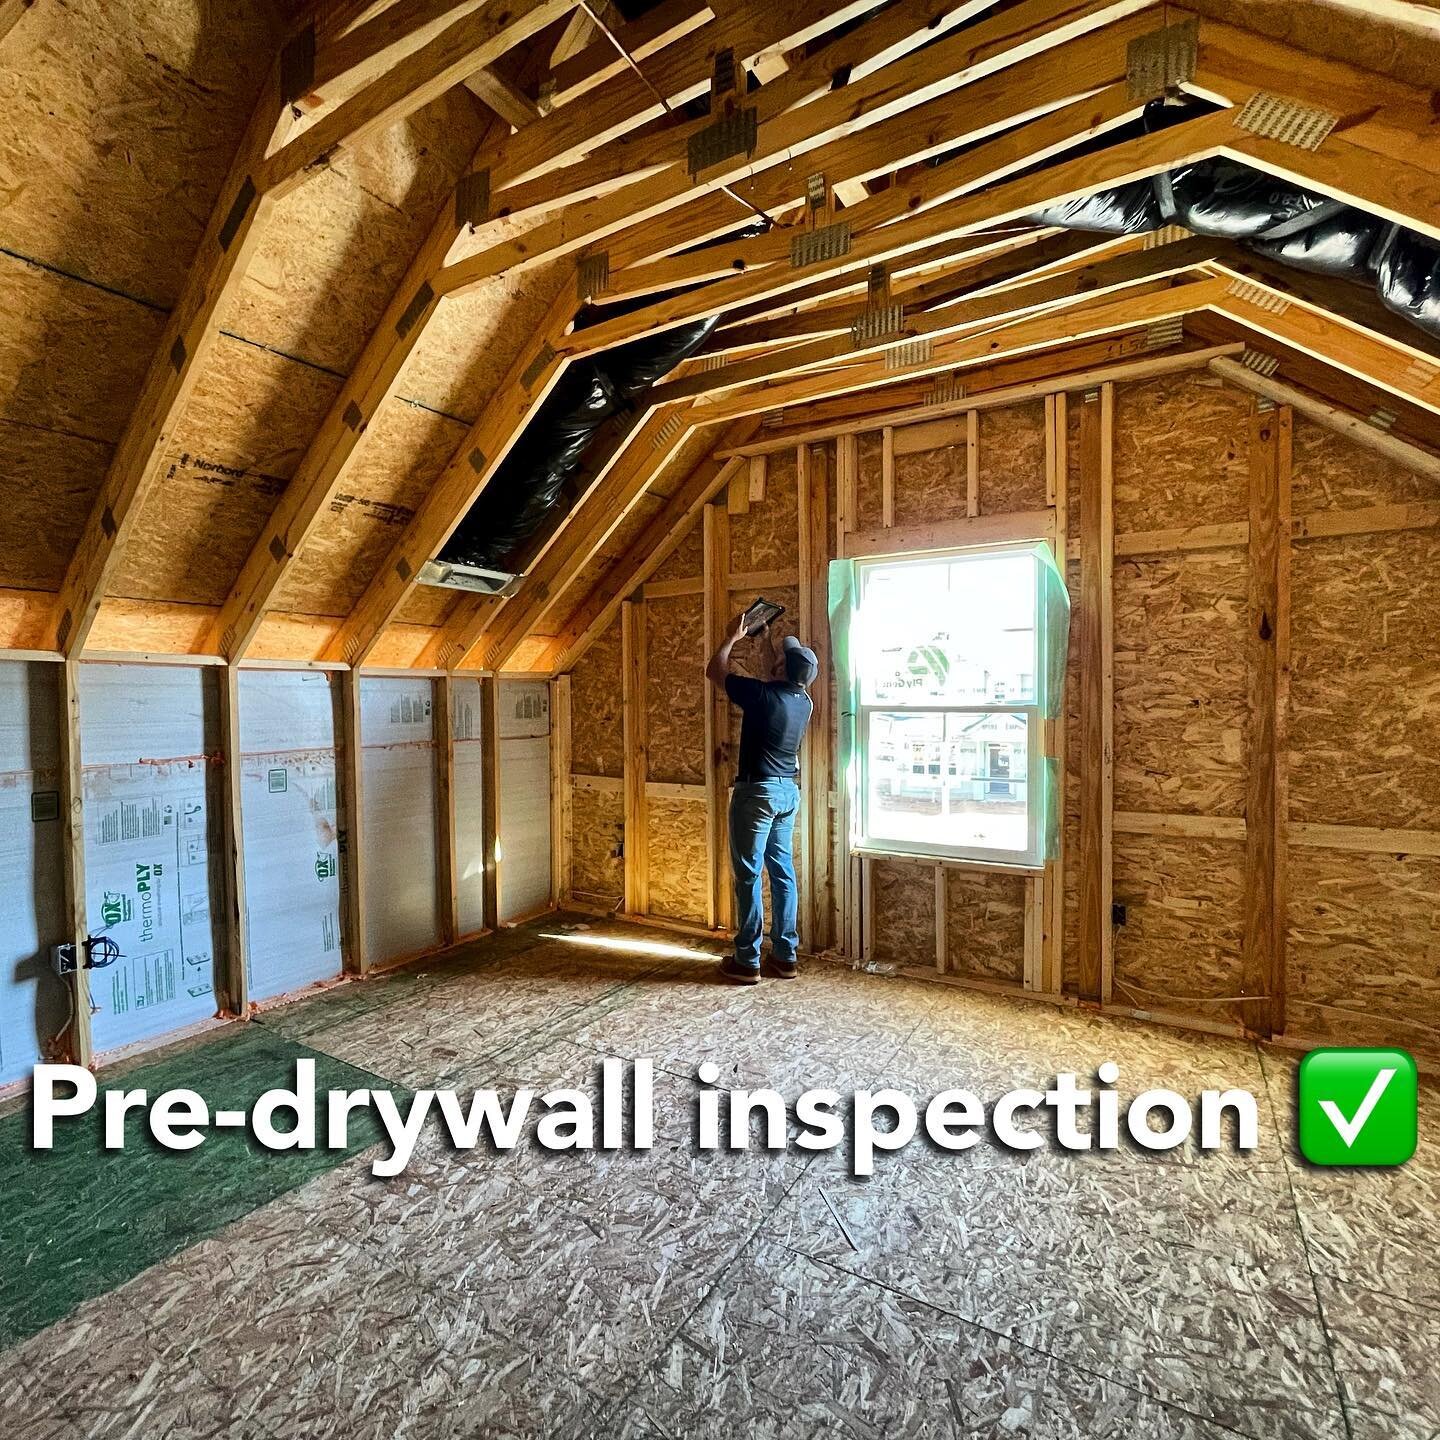 Pre-drywall inspection ✅

#homeinspection #predrywallinspection #adayinthelifeofahomeinspector #EHI #elevatedhomeinspections